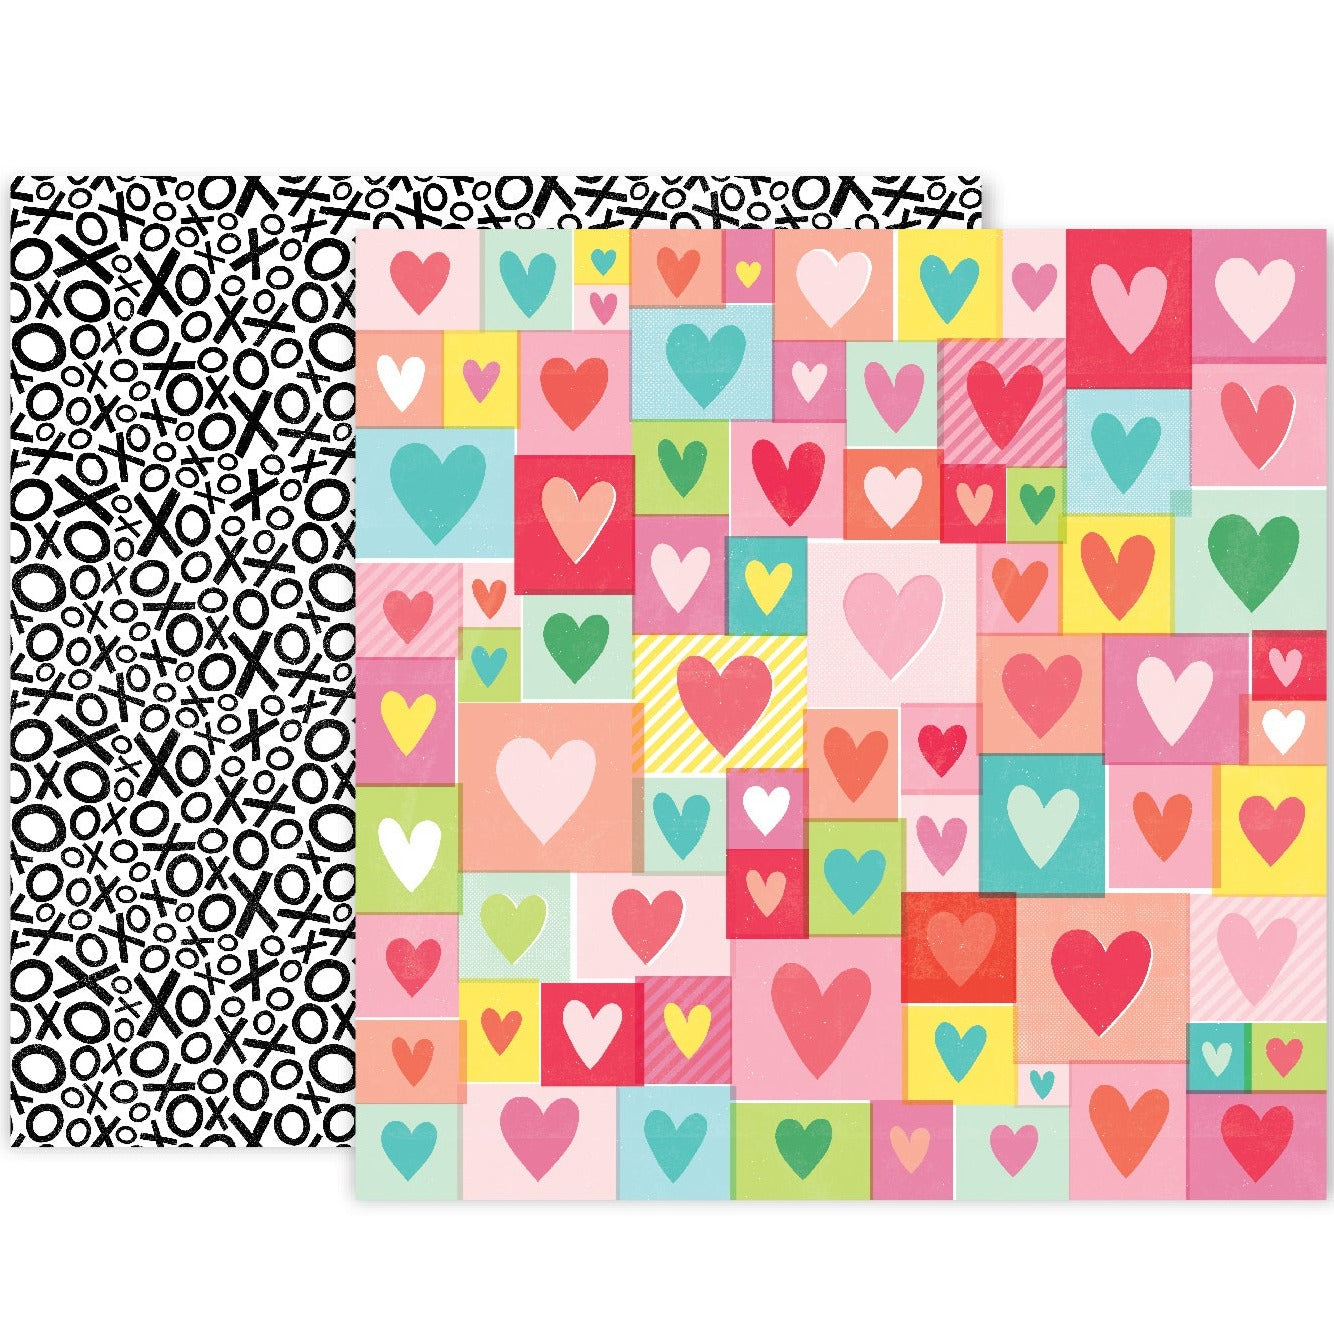 Multi-Colored (Side A - playful valentine blocks with heart centers in lovely reds and pinks with vibrant pops of other rainbow colors on a white background, Side B - bold black X's and O's scattered all over a white background)